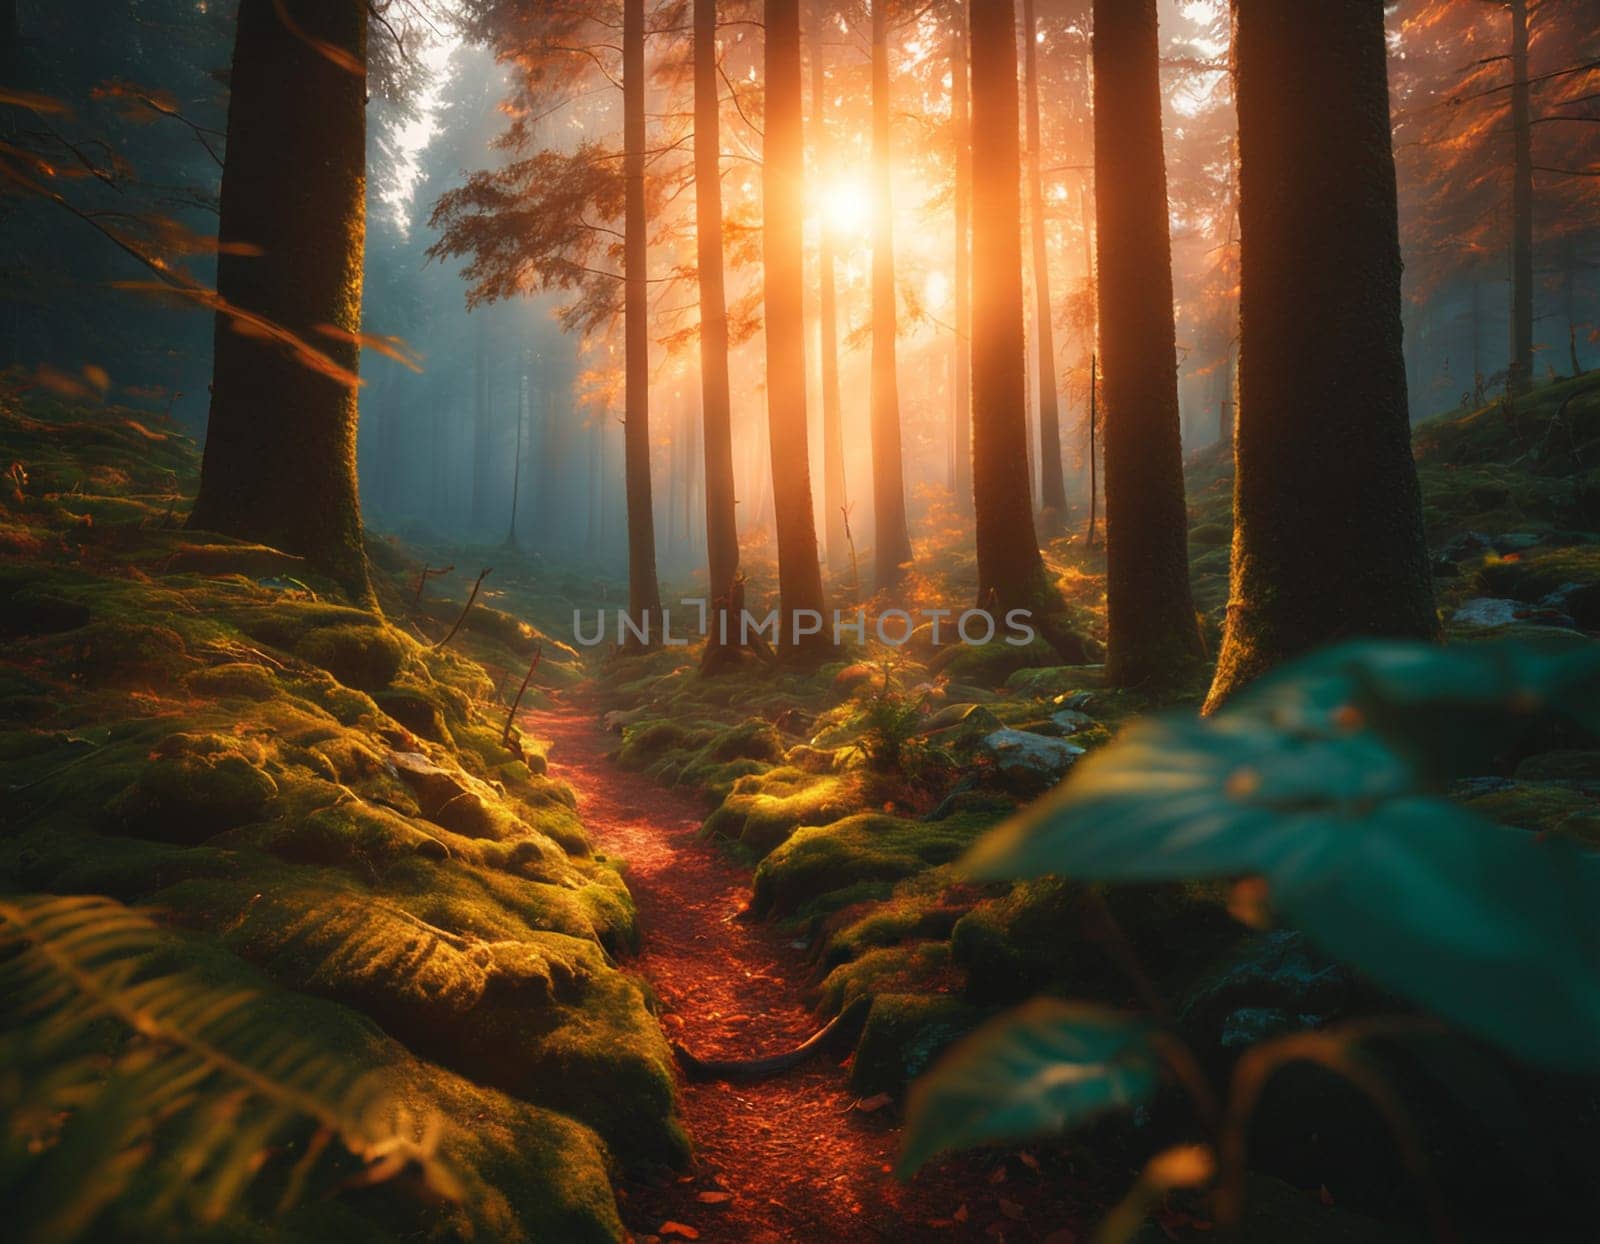 Beautiful morning forest. High quality illustration